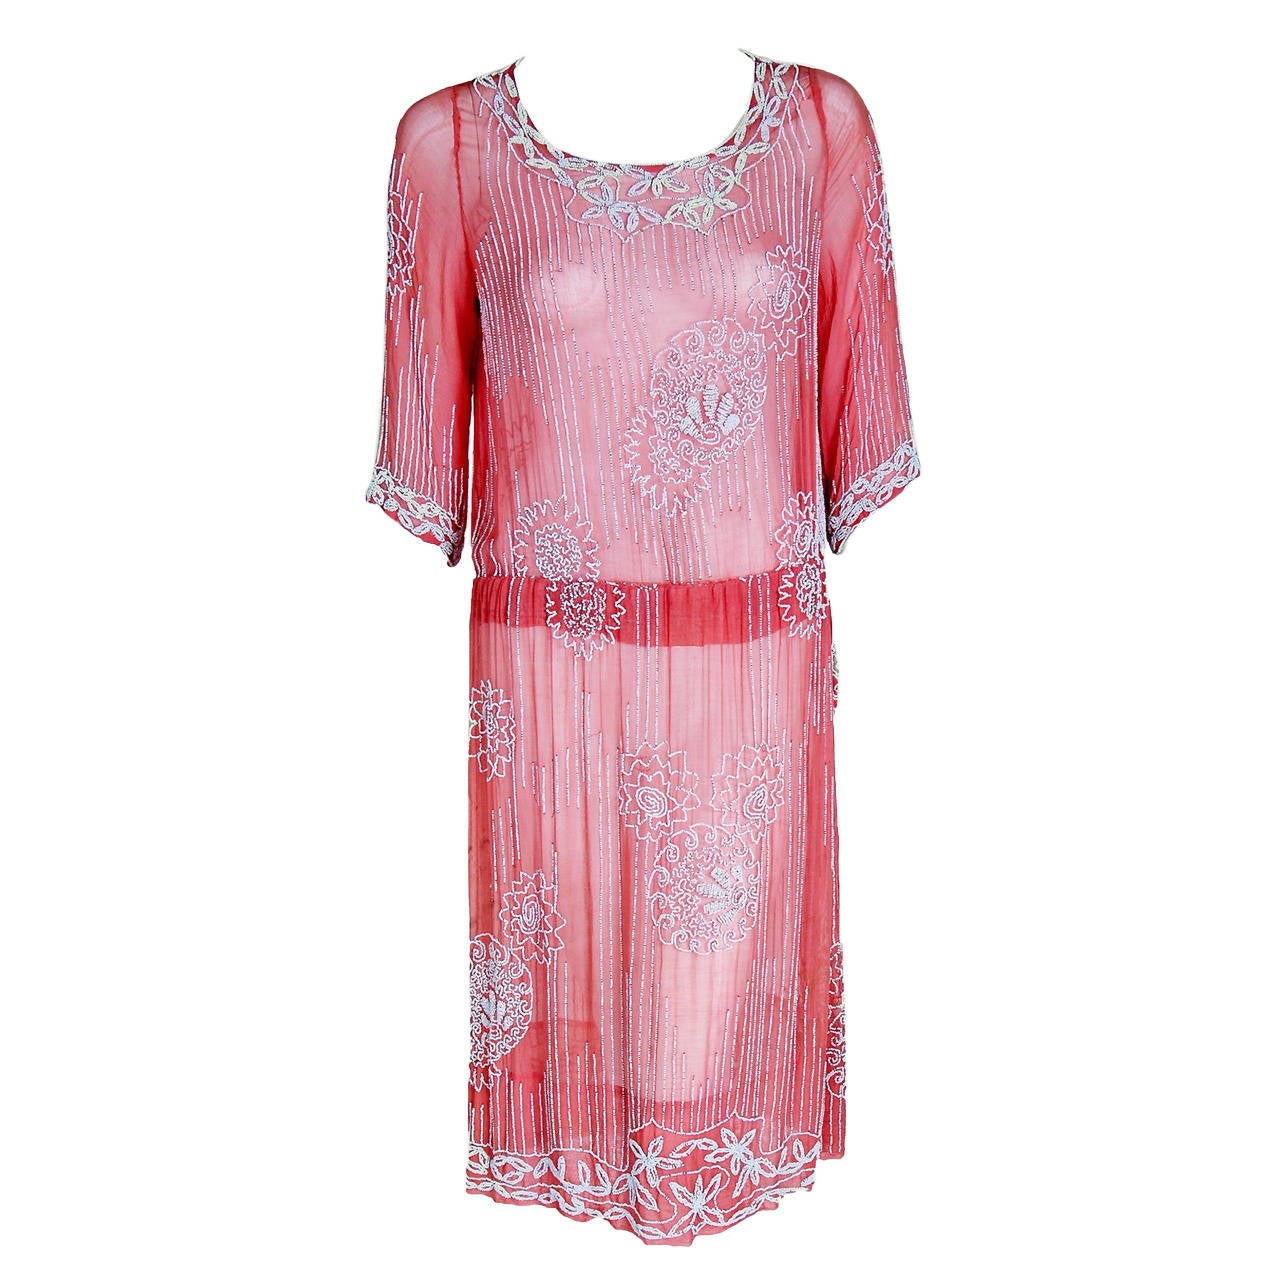 1920's French Rose-Pink Beaded Sheer Cotton Deco Drop-Waist Flapper Dress